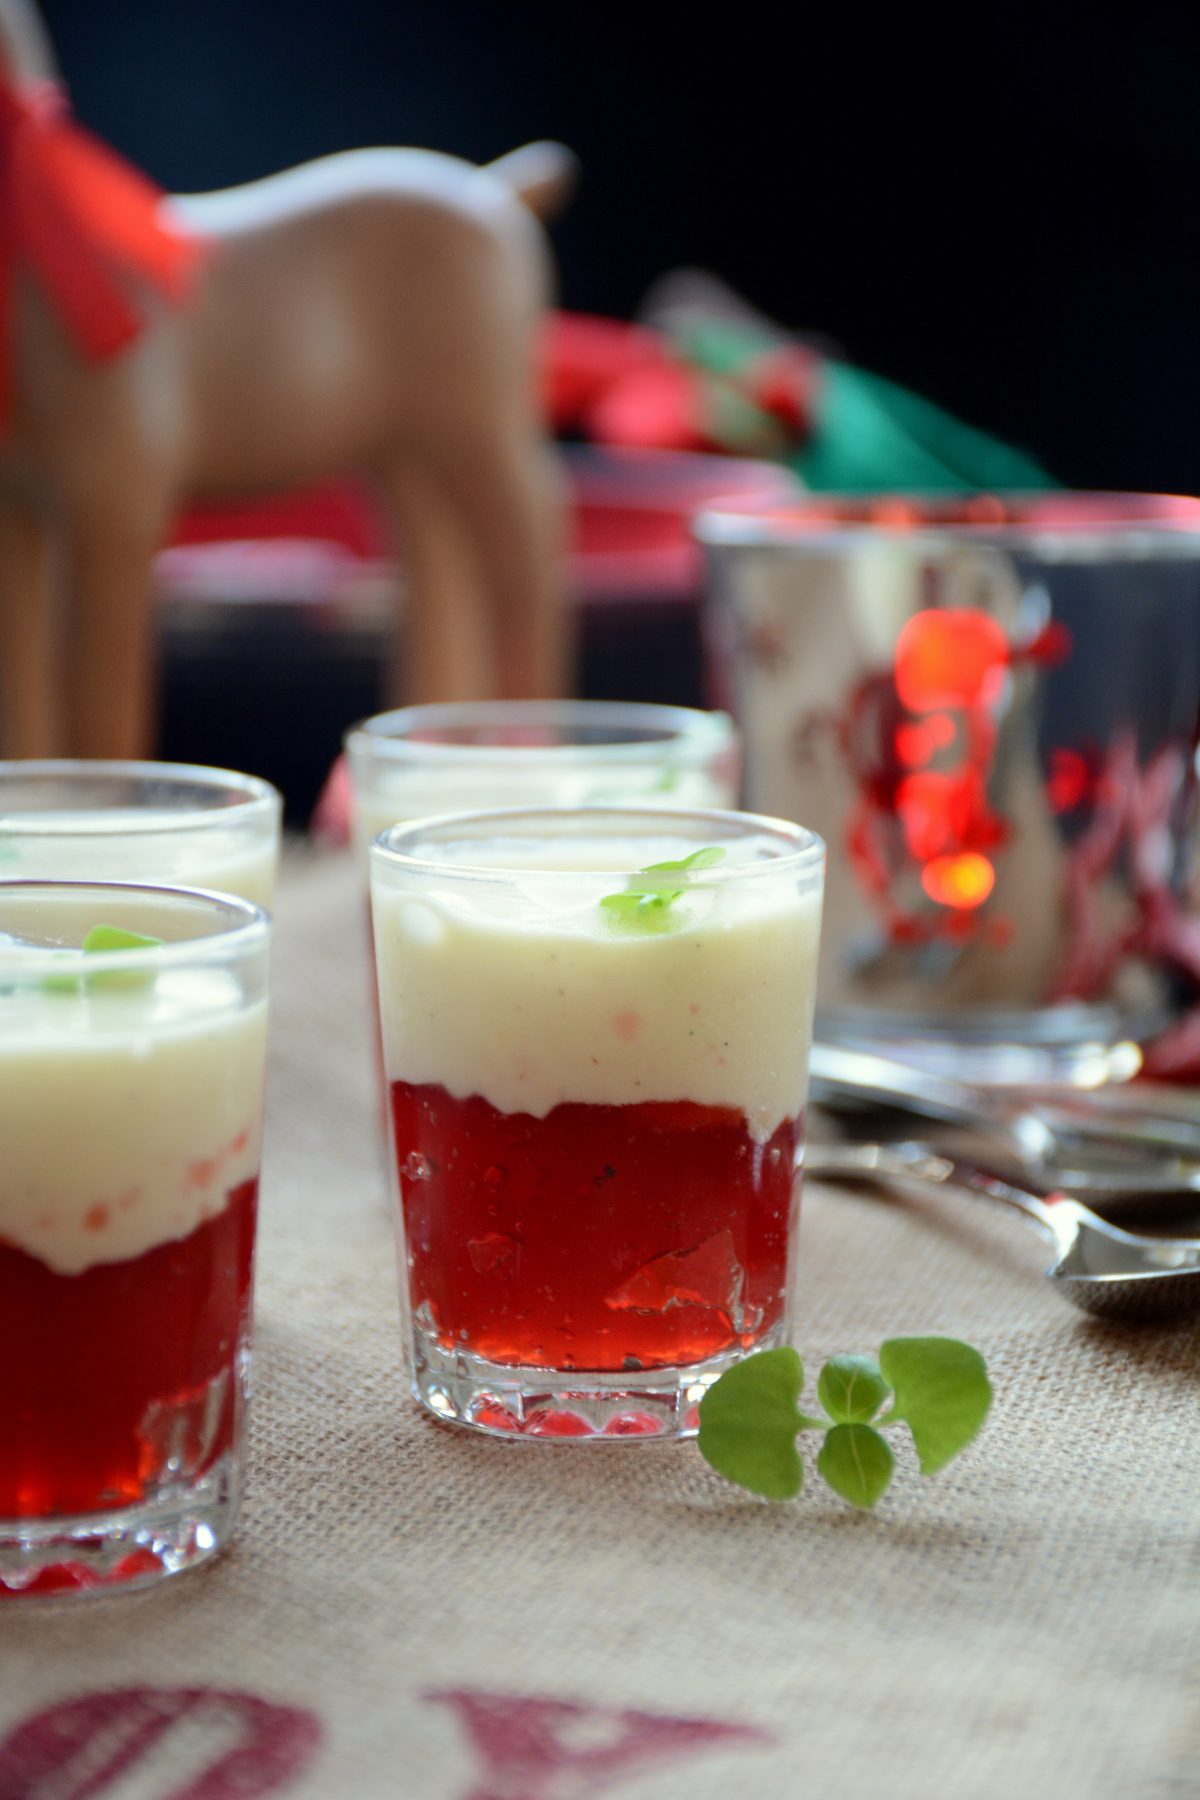 A berrylicious Christmas with this fun Strawberry Jelly (with Chambord Liqueur) and Vanilla ‘Semifreddo’ Custard - thespiceadventuress.com